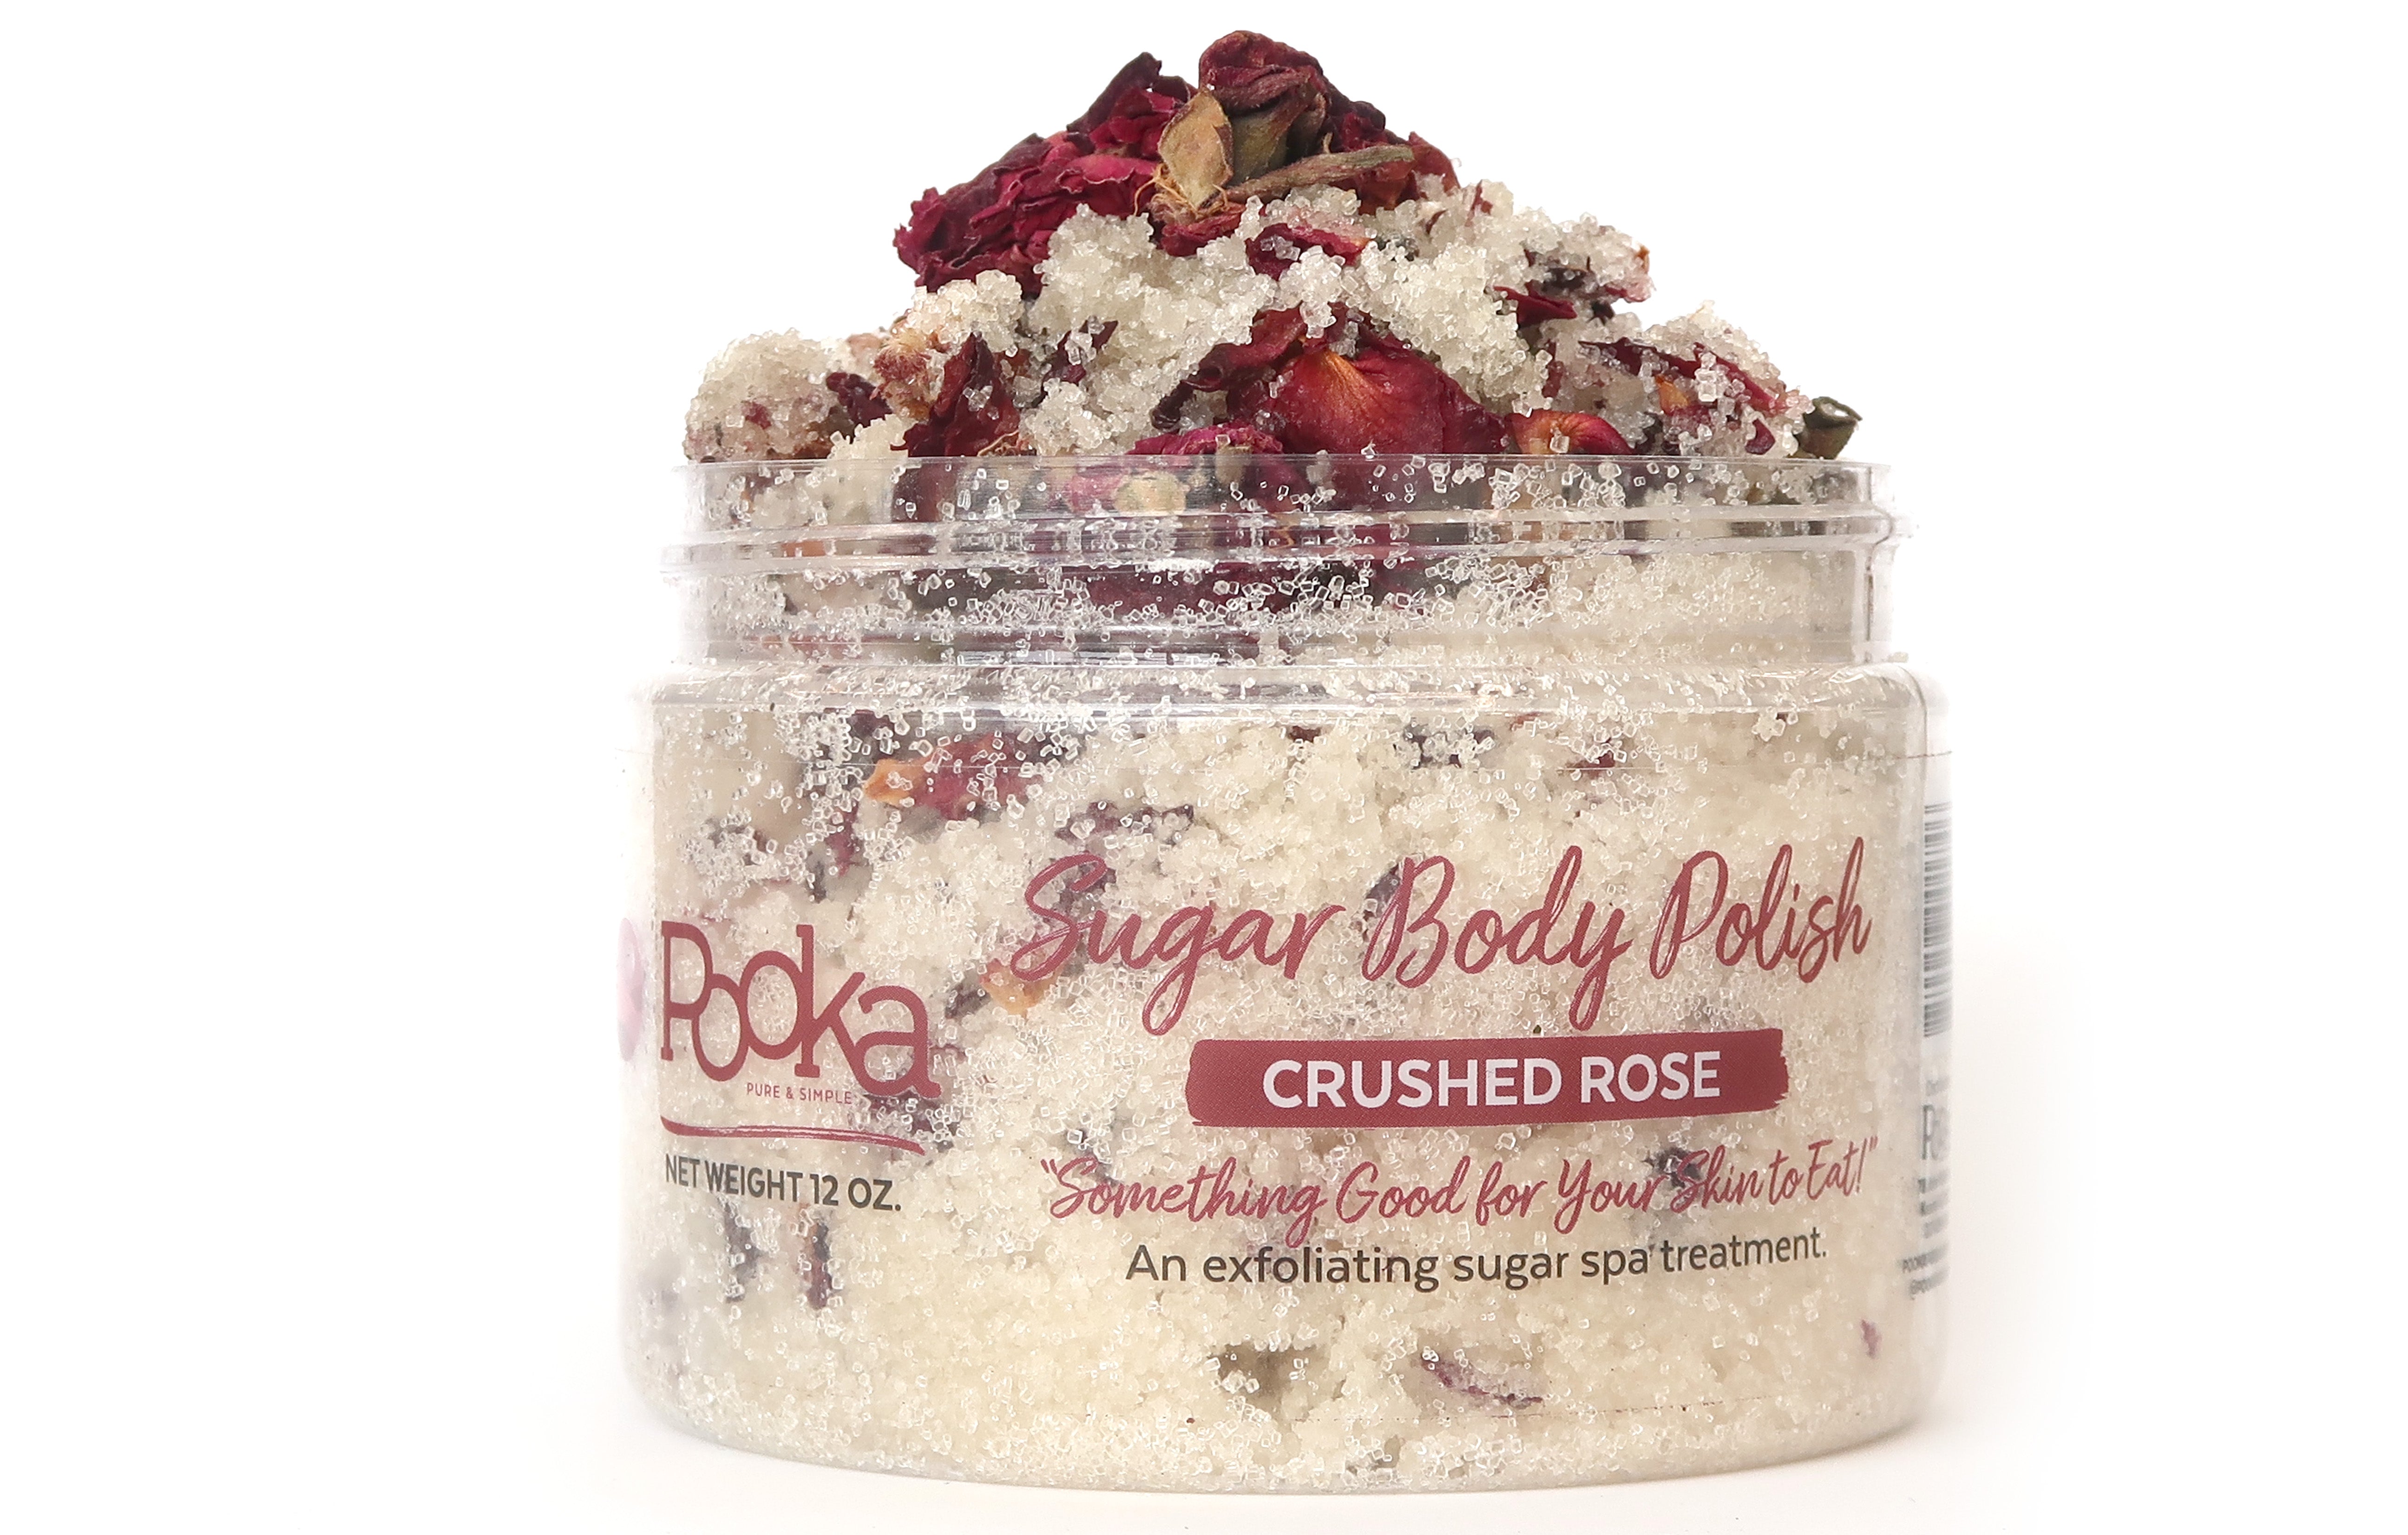 Crushed Rose Body Polish - Pooka Pure and Simple